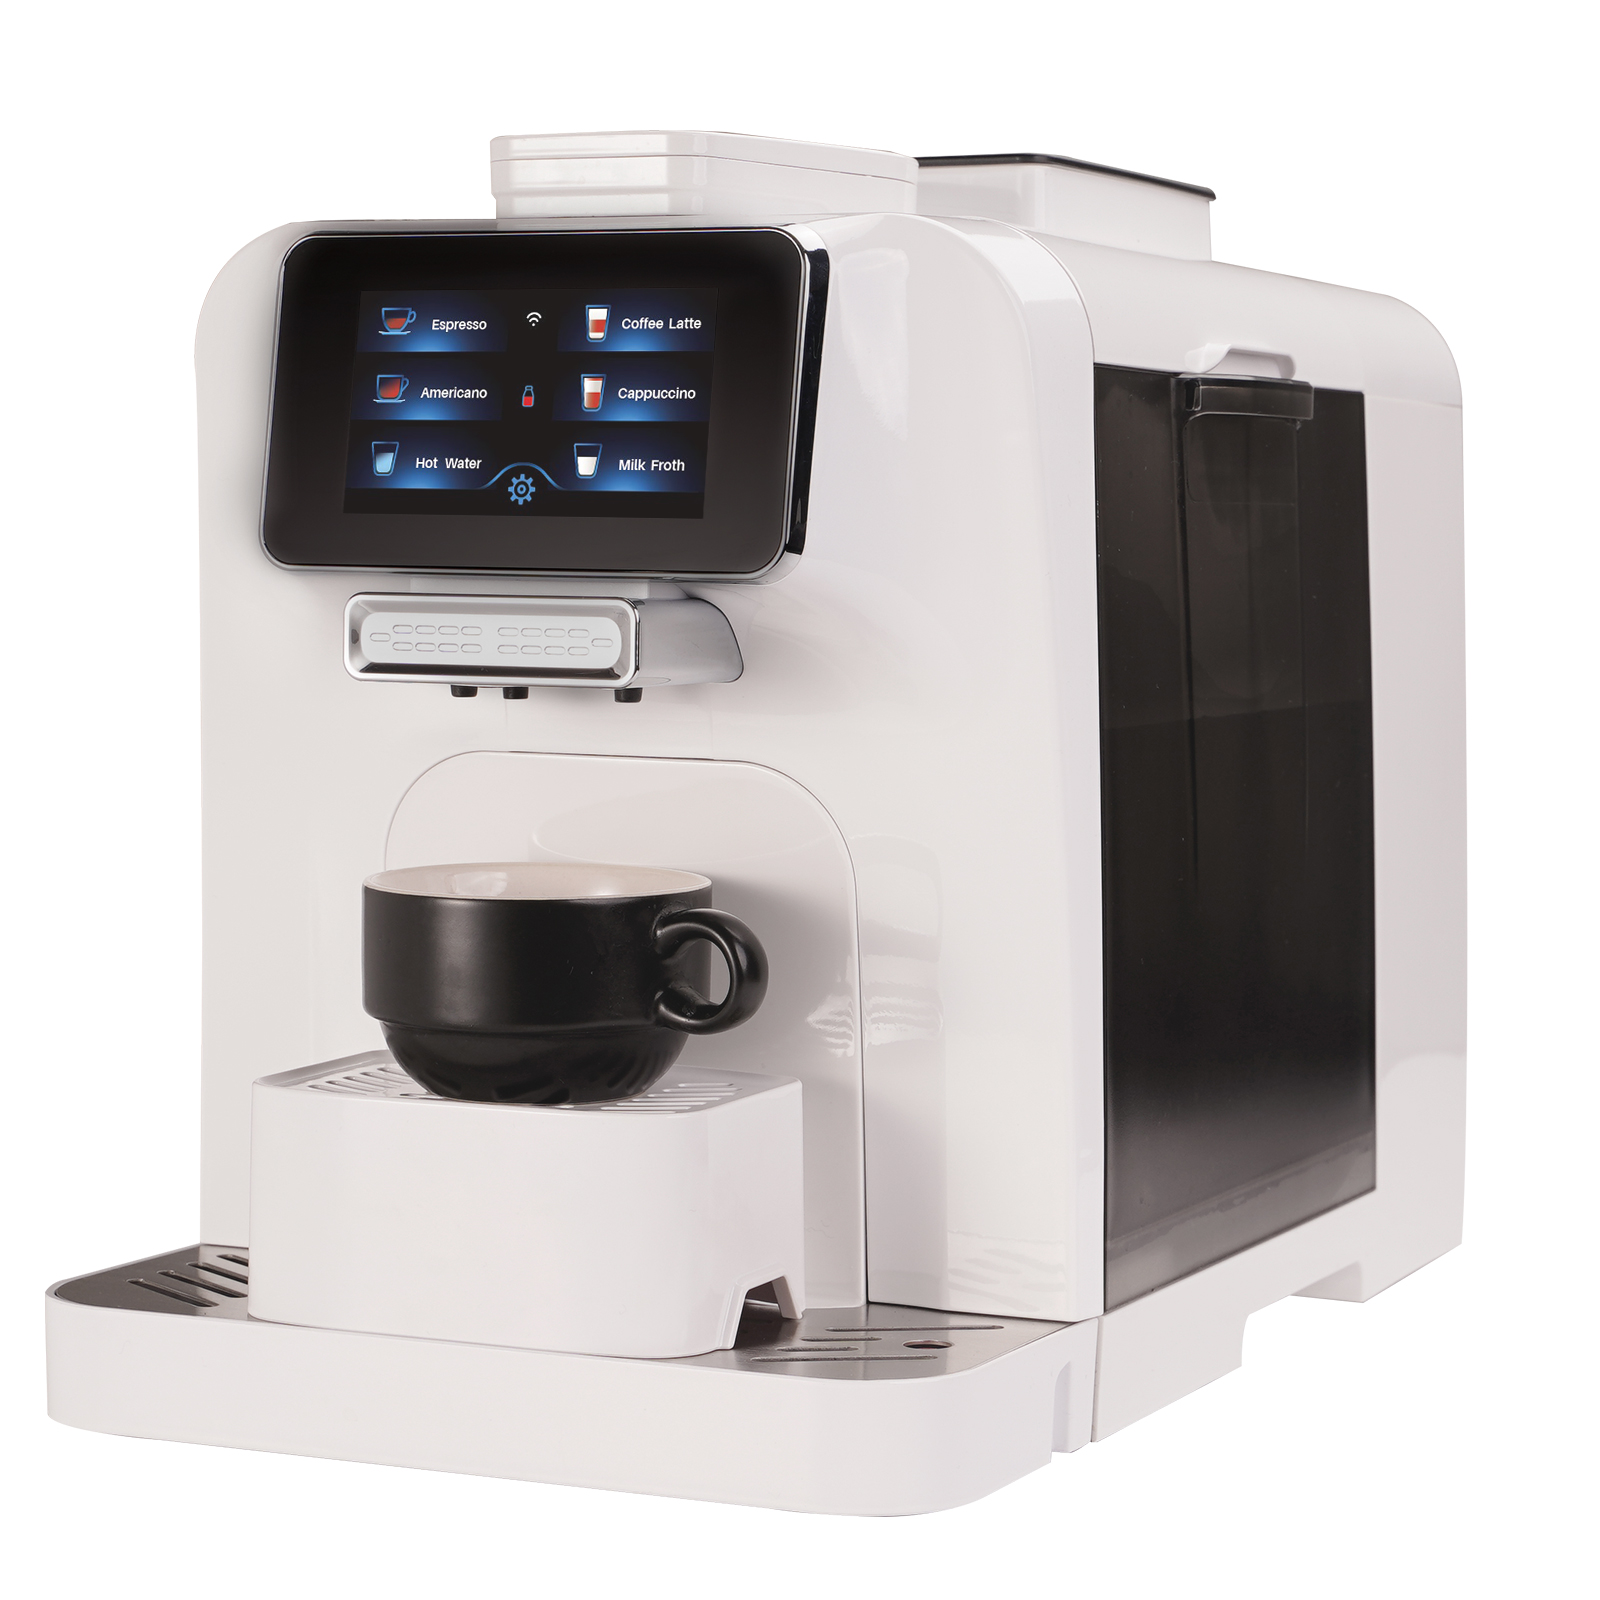 Mcilpoog ES317 Fully Automatic Espresso Machine，Milk Frother,Built-in  Grinder，Intuitive Touch Display ，7 Coffee Varieties for Home, Office,and  more